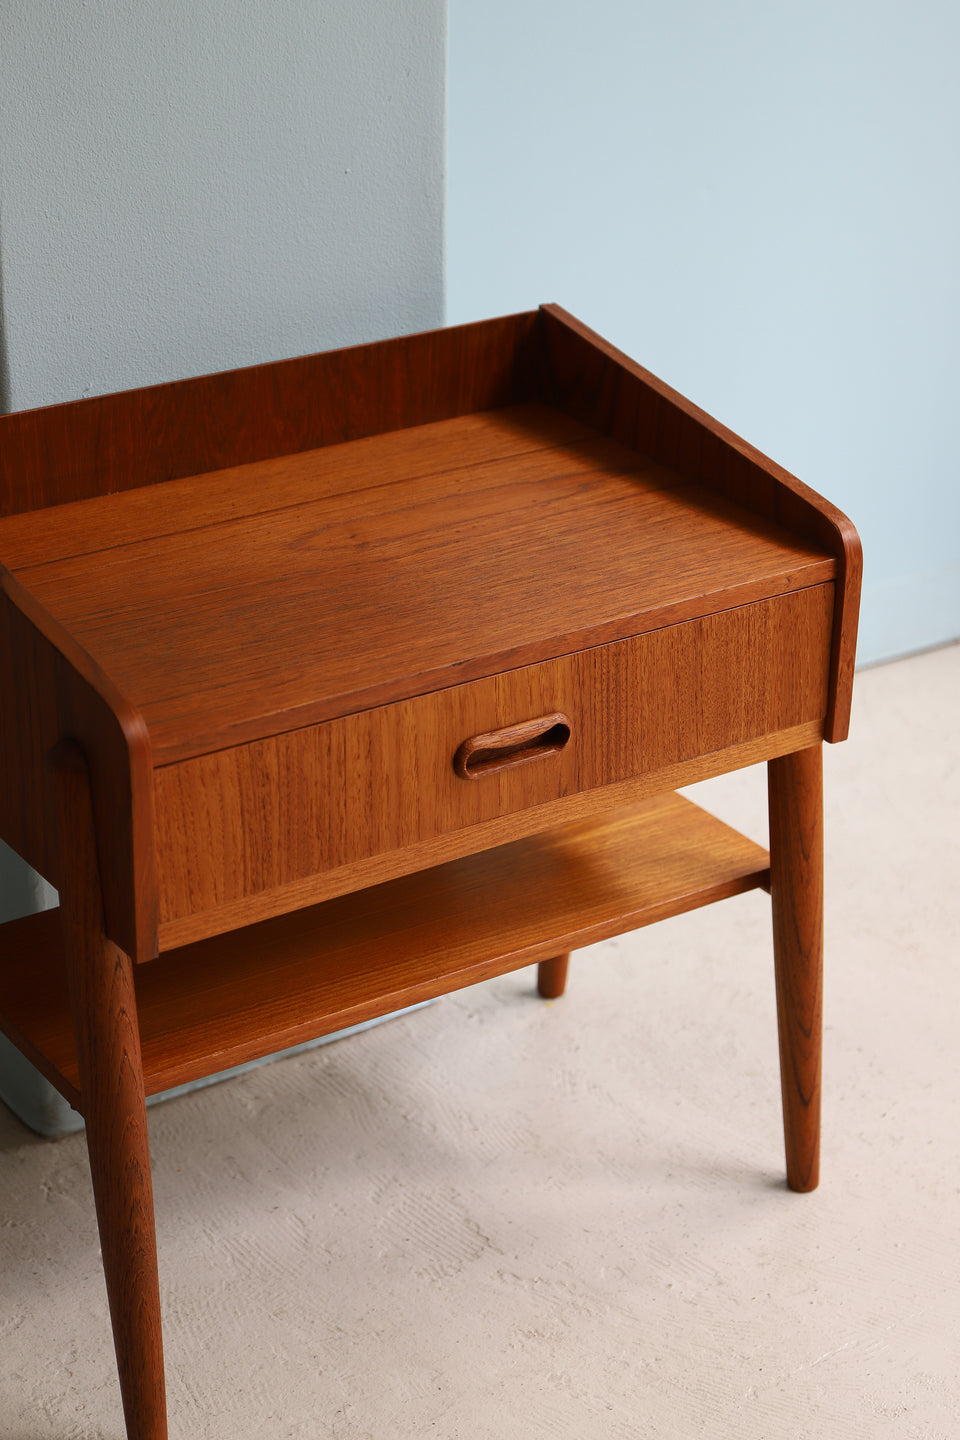 Danish Vintage Side Table with Drawer/デンマークヴィンテージ サイドテーブル 引き出し付き チーク材 北欧家具